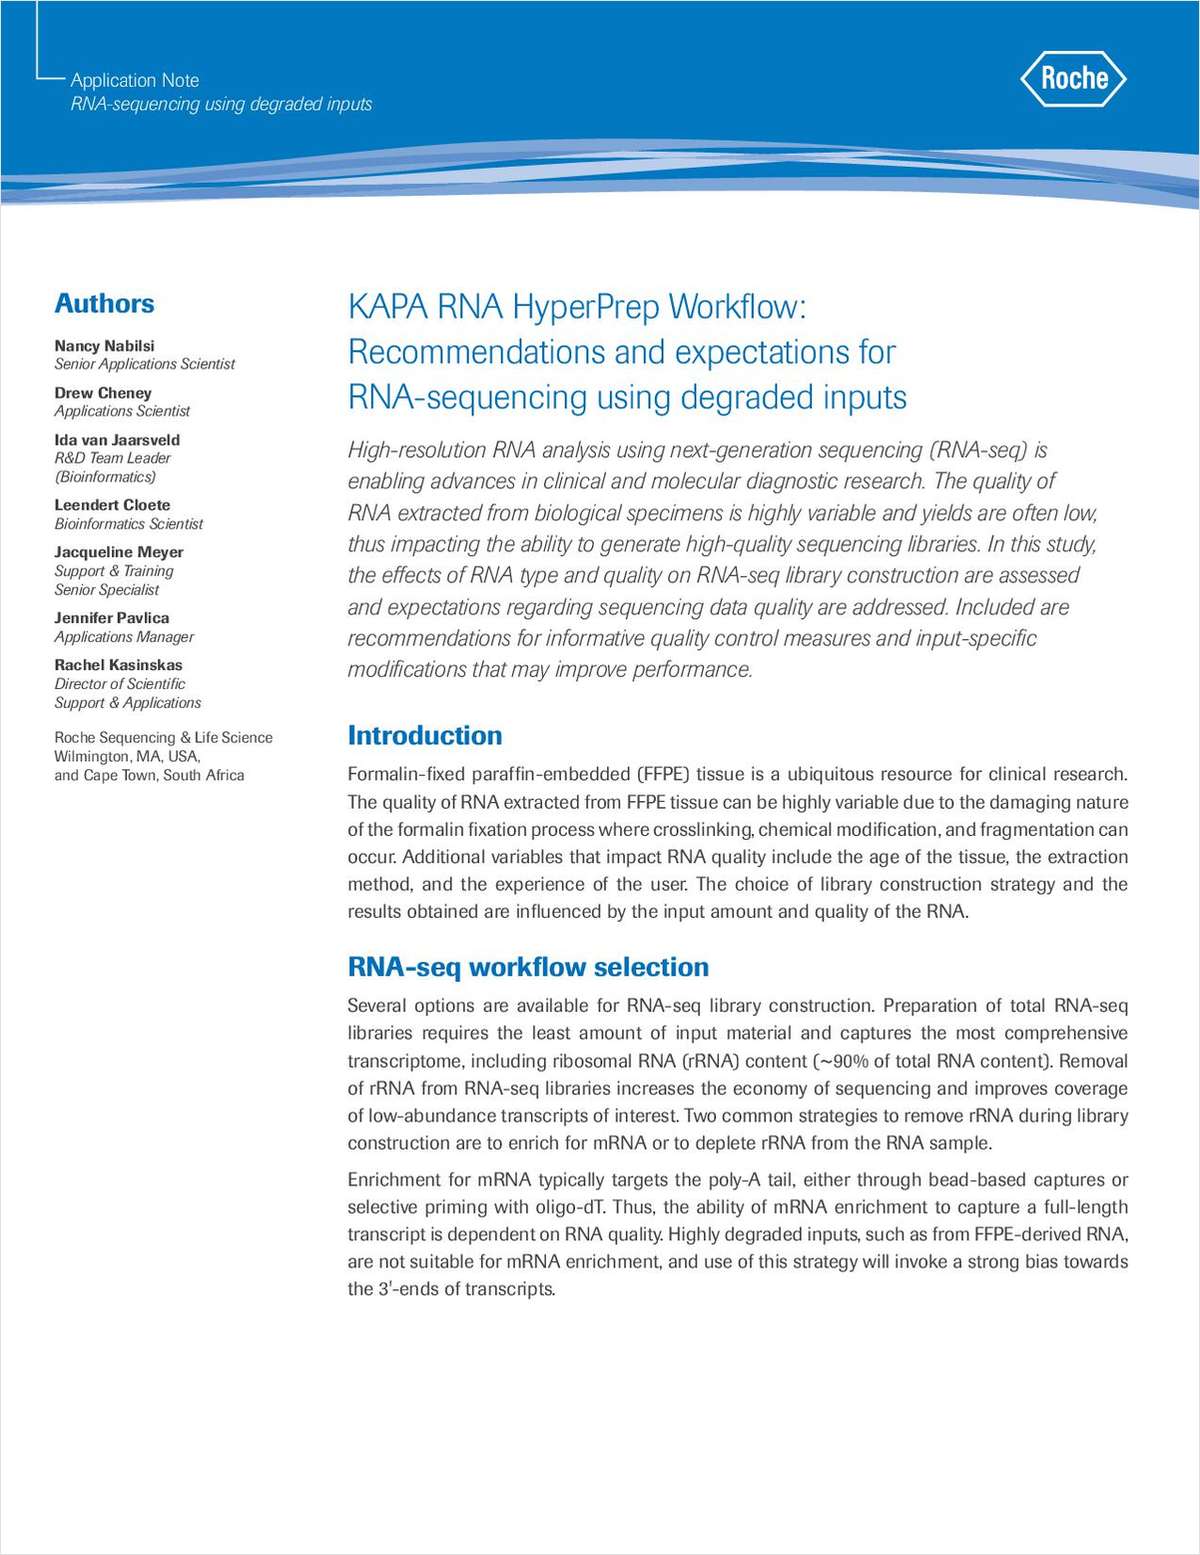 KAPA RNA HyperPrep Workflow: Recommendations and Expectations for RNA-Sequencing Using Degraded Inputs